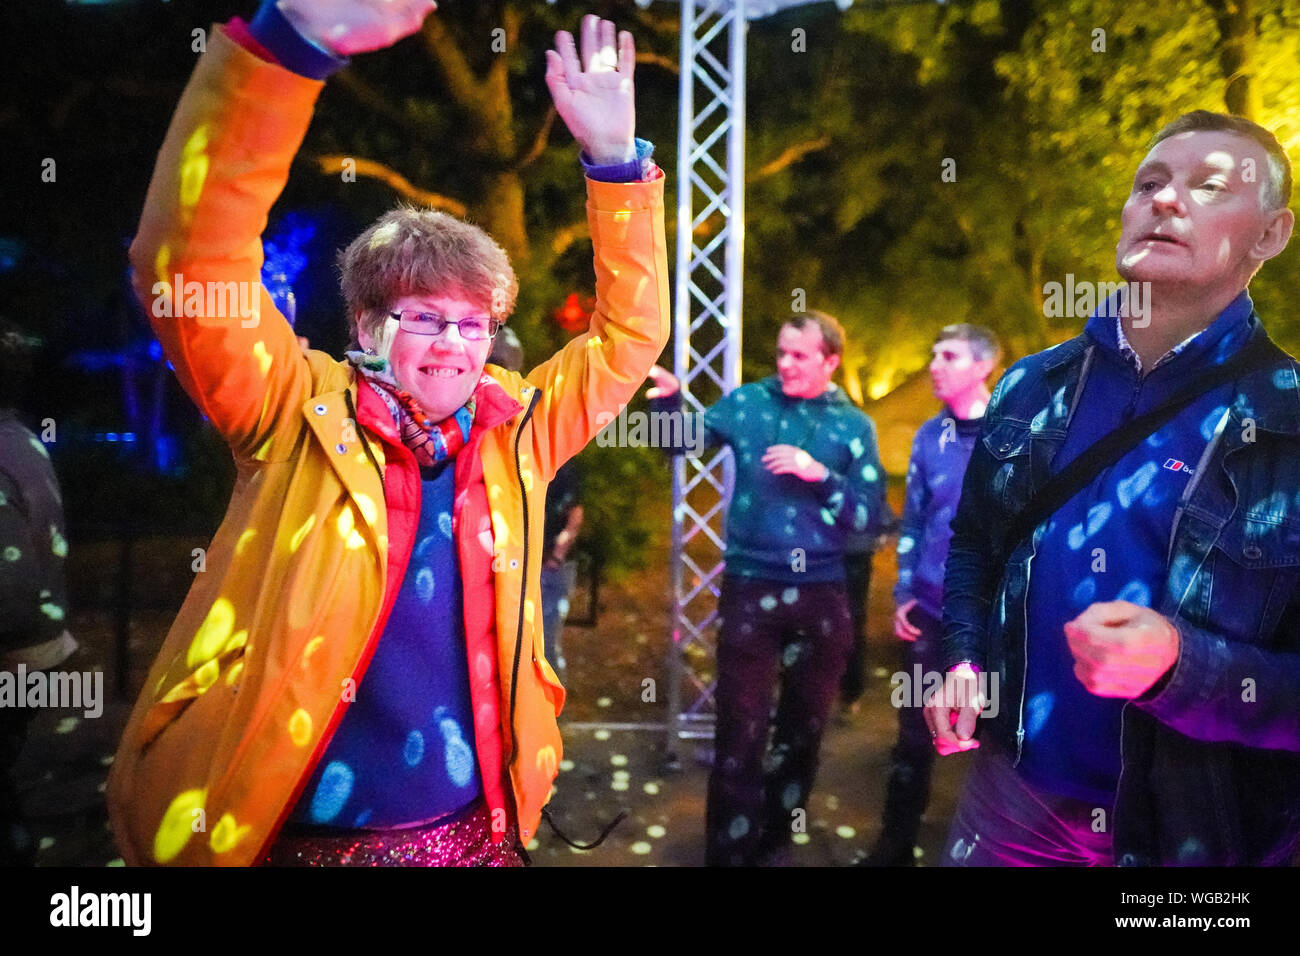 Dorset, UK. Sunday, 1 September, 2019. Views of the 2019 End of the Road Festival. Photo: Roger Garfield/Alamy Live News Stock Photo